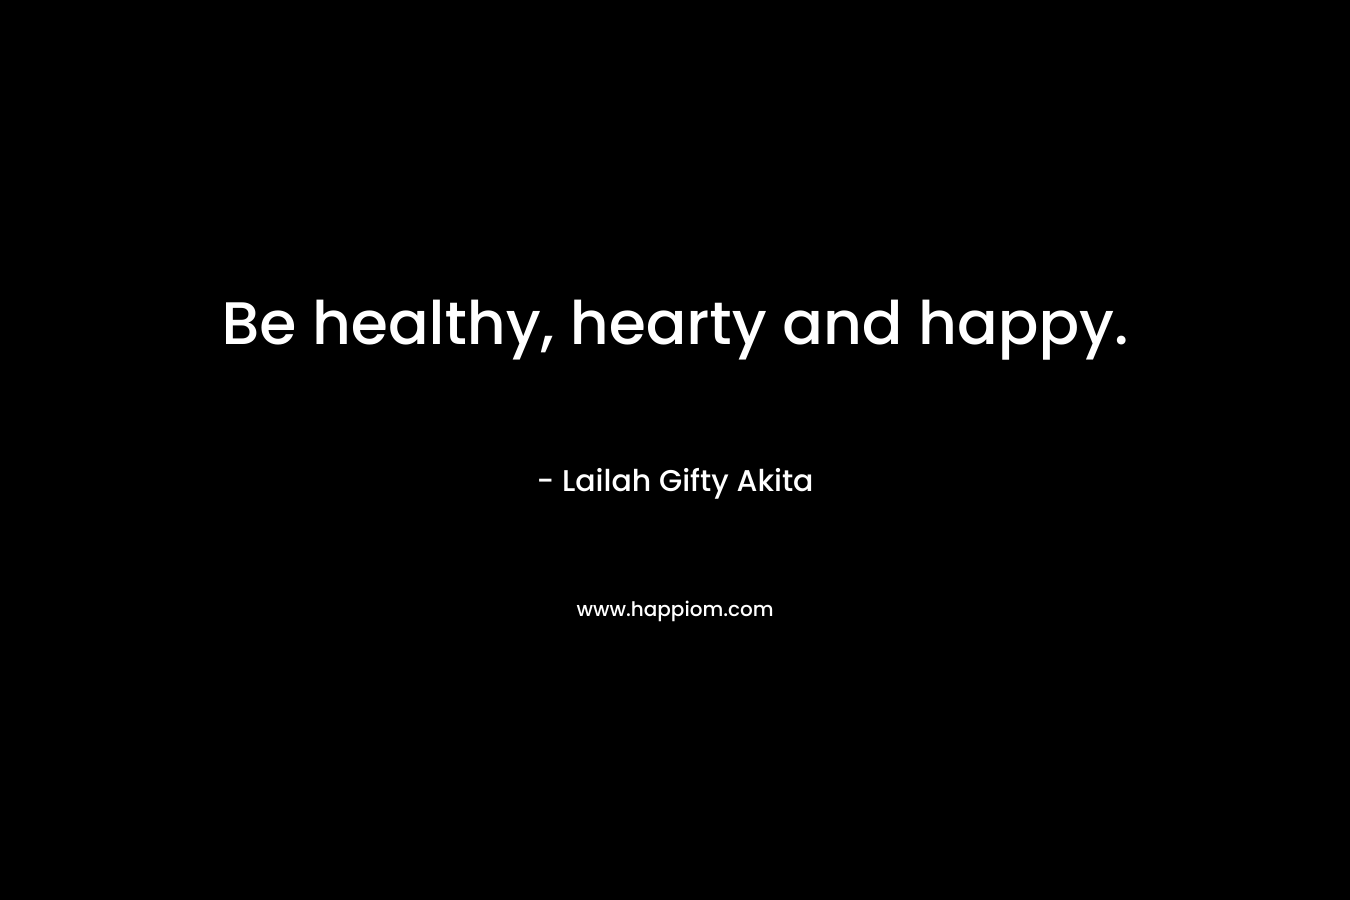 Be healthy, hearty and happy.